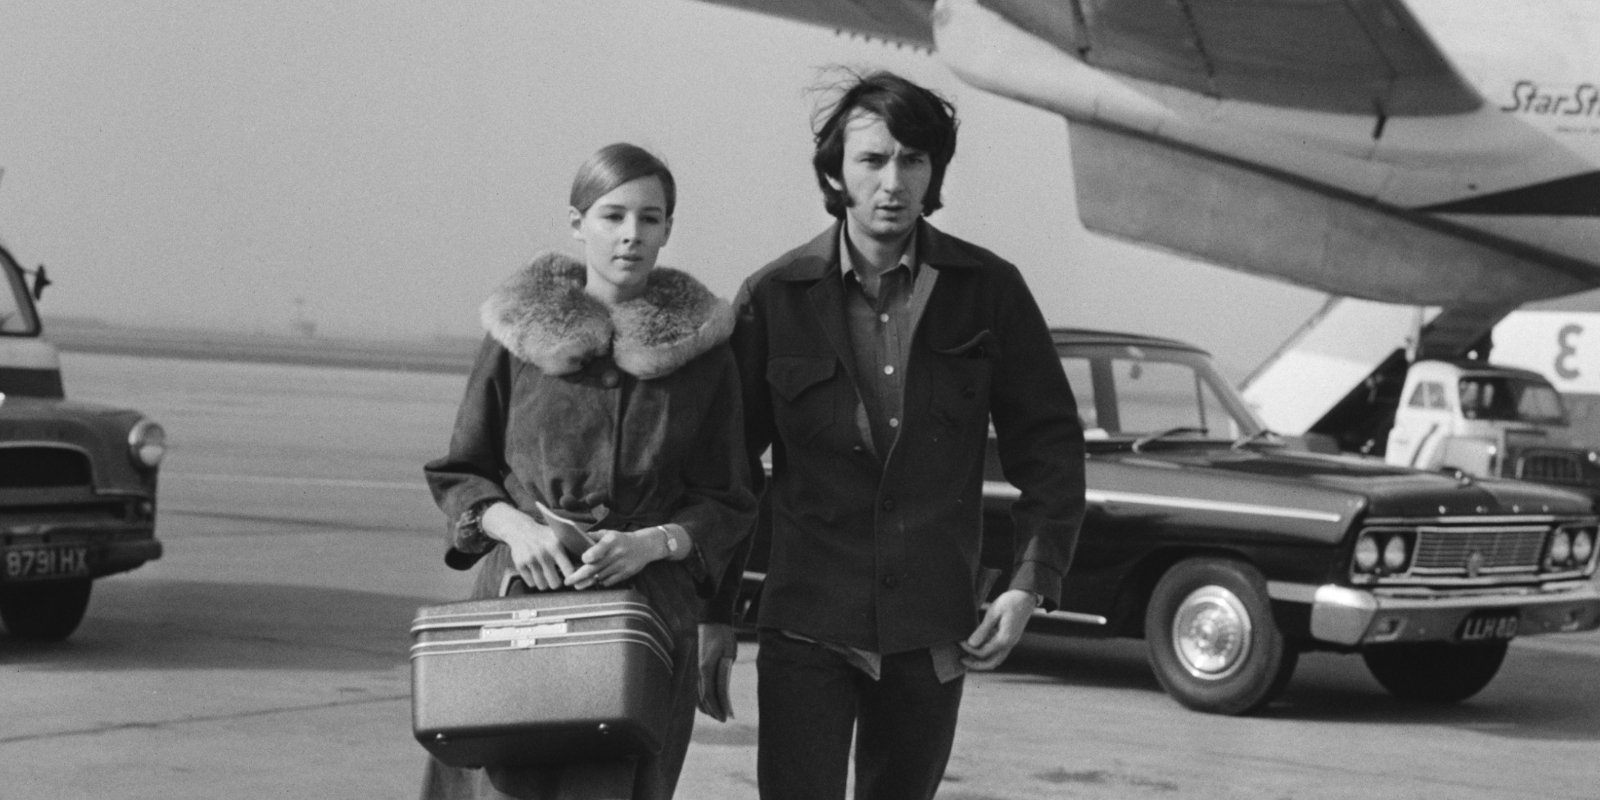 Phyllis and Mike Nesmith in a photograph taken in 1967.